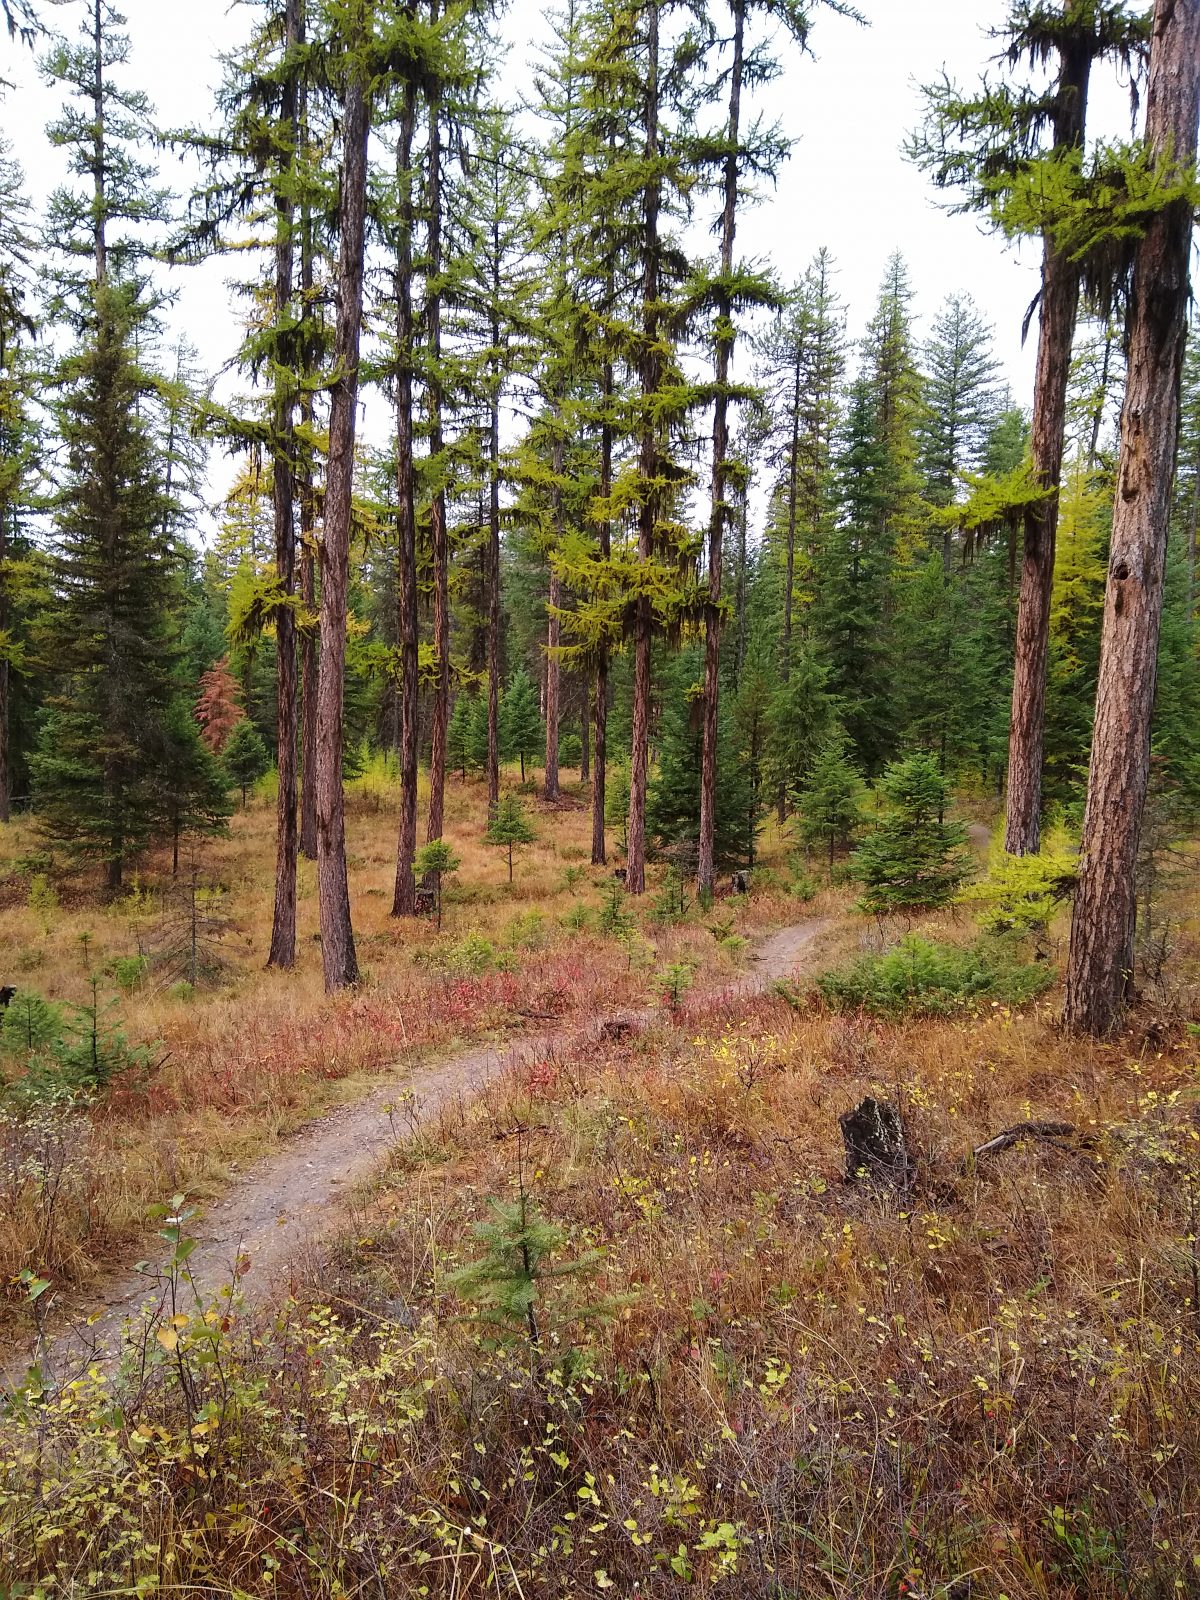 Larch trees turning yellow on the Whitefish Trail